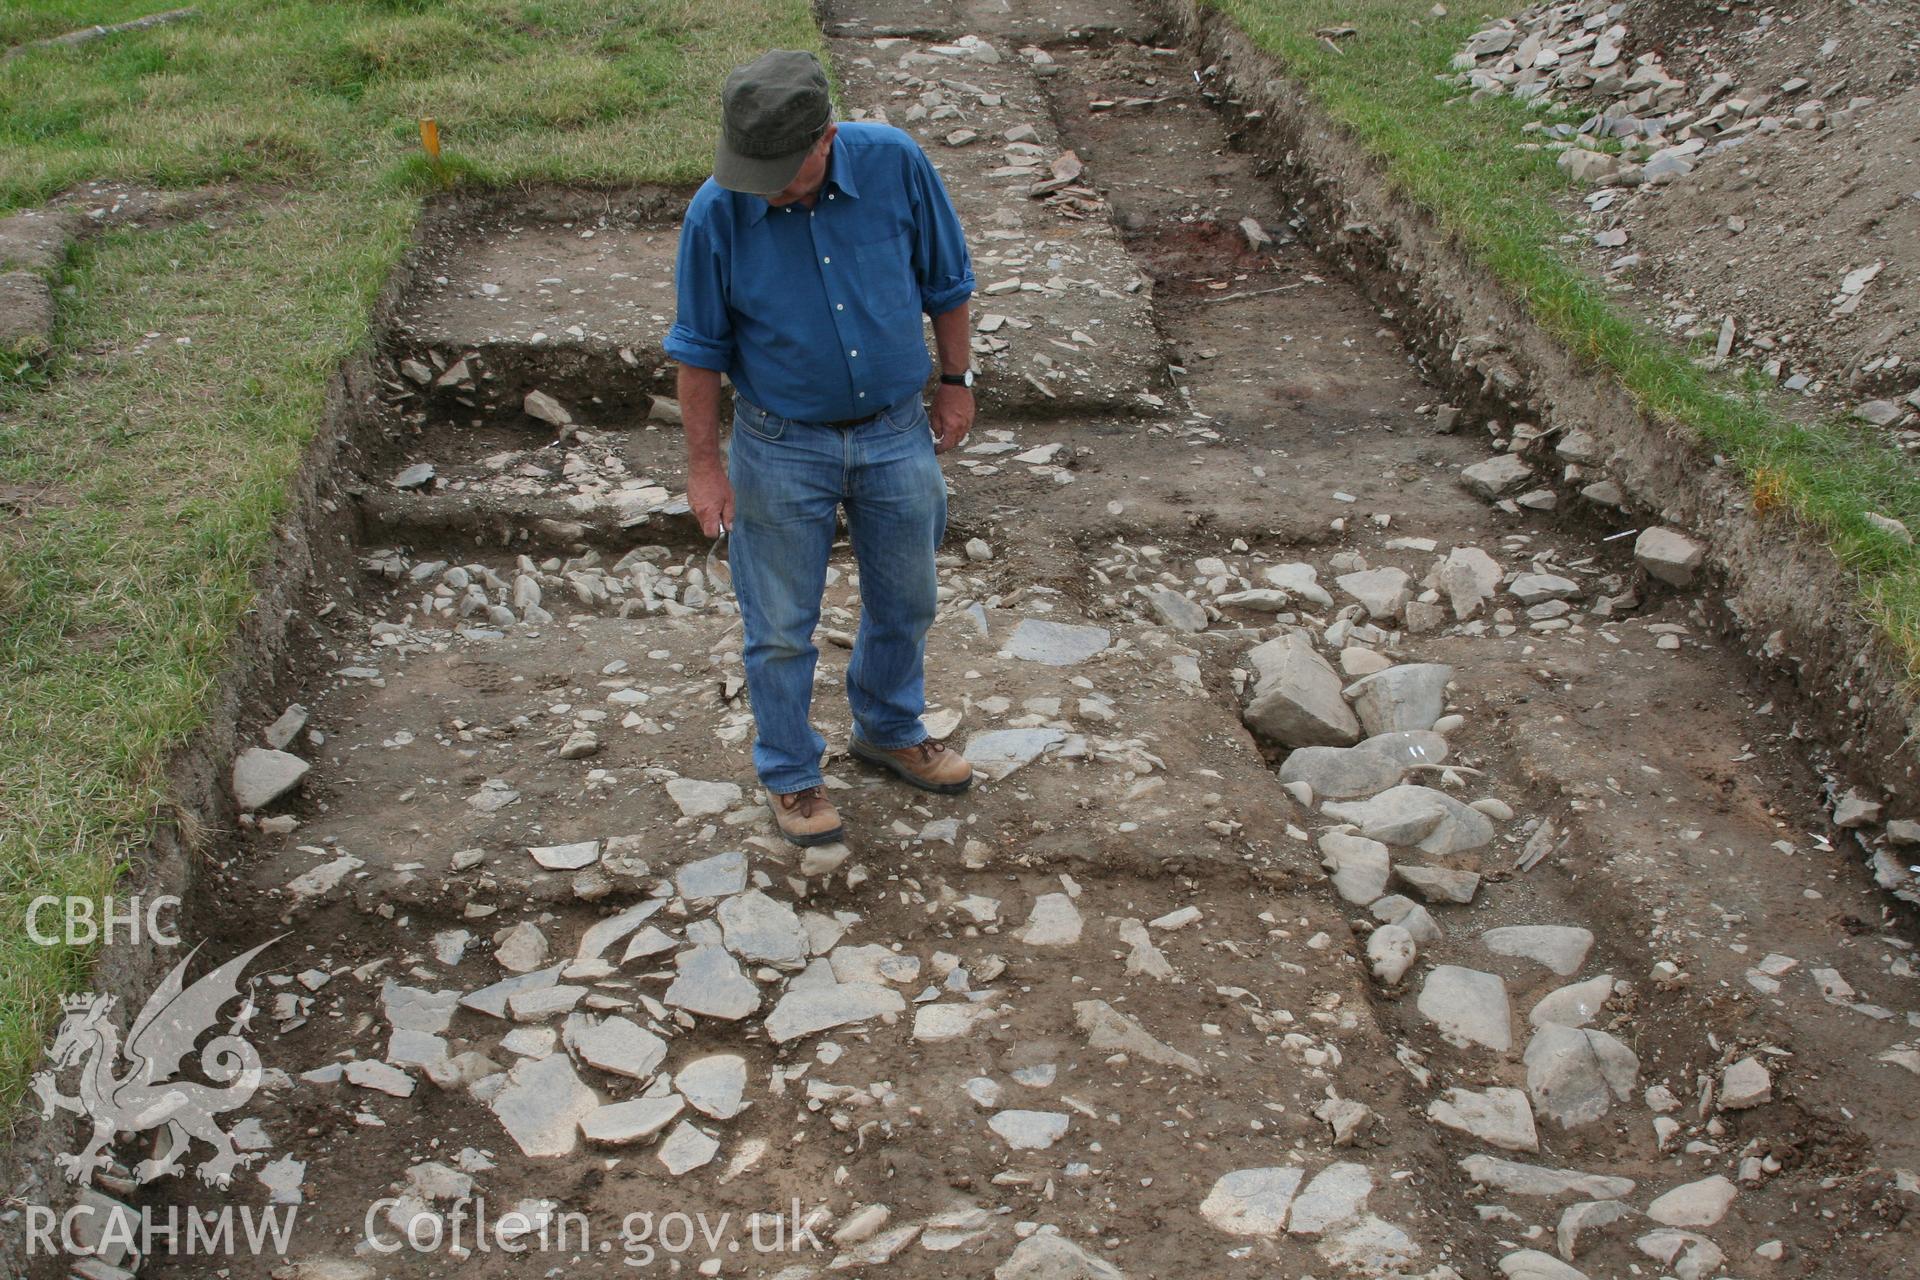 Abermagwr Roman villa excavations, July 2010. Trench A from the north following excavation. Figure stands in exterior angle of villa formed by rear (north) villa wall footings crossing left to right and footings of Room 6 to right.